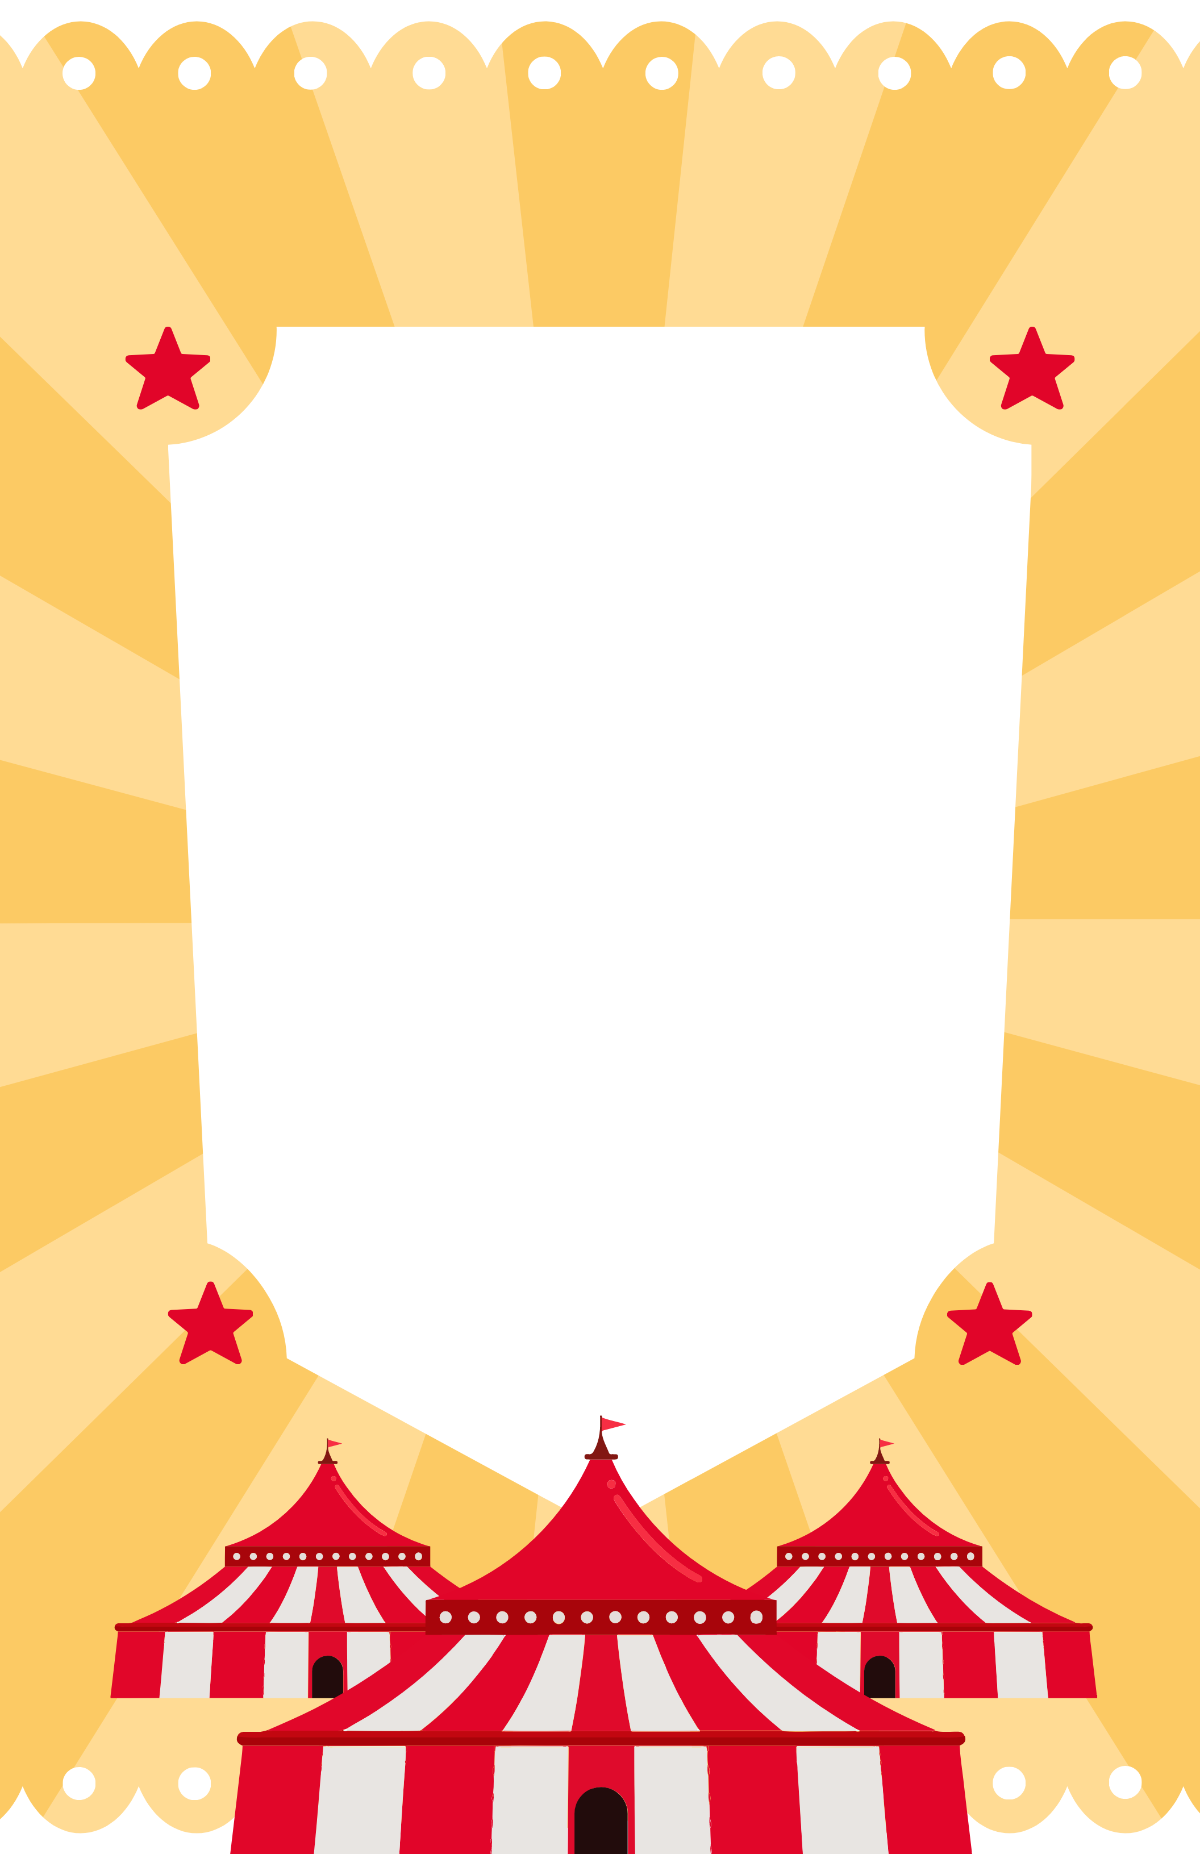 Blank Circus Poster Template